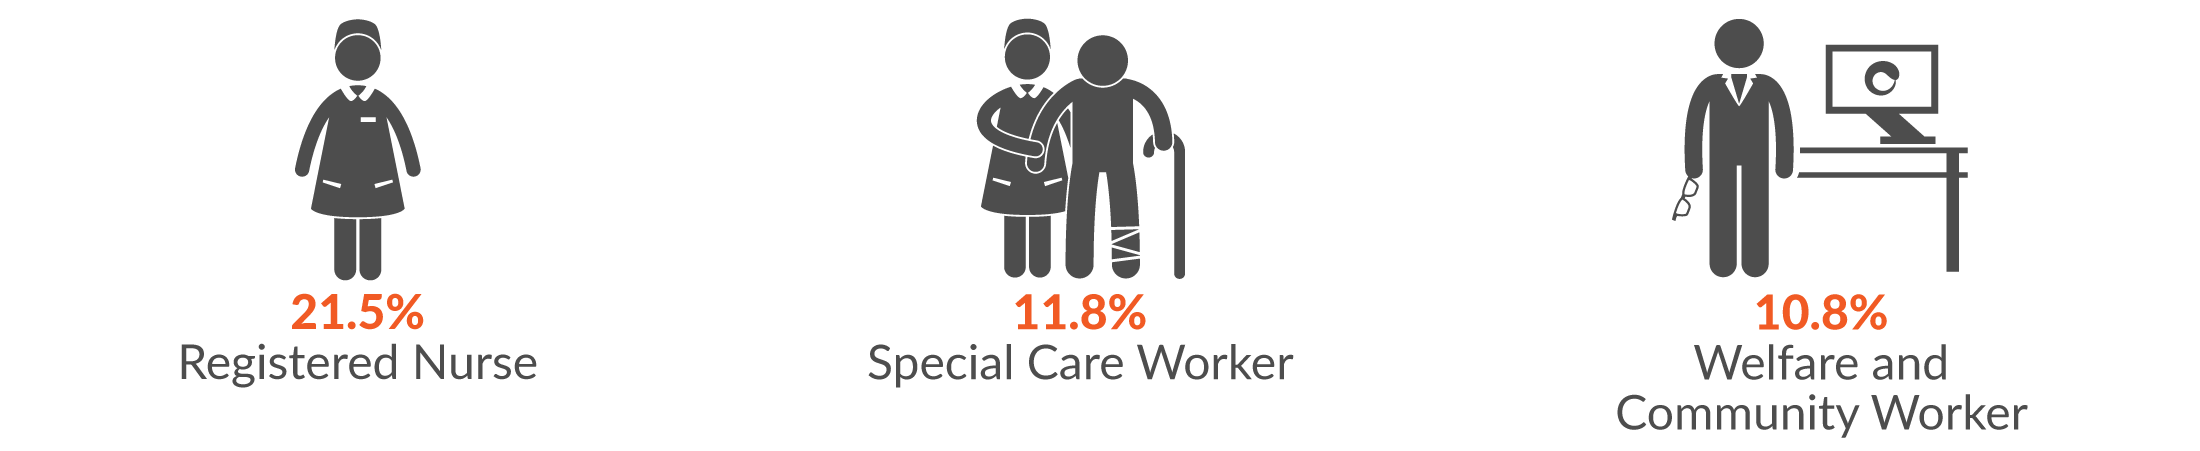 This infographic shows the main occupations by serious injury claims. 21.5% of all Health and Community Services serious injury claims were made by a registered nurse; 11.8% by a Special Care Worker; and 10.8% by  Welfare and Community Worker.